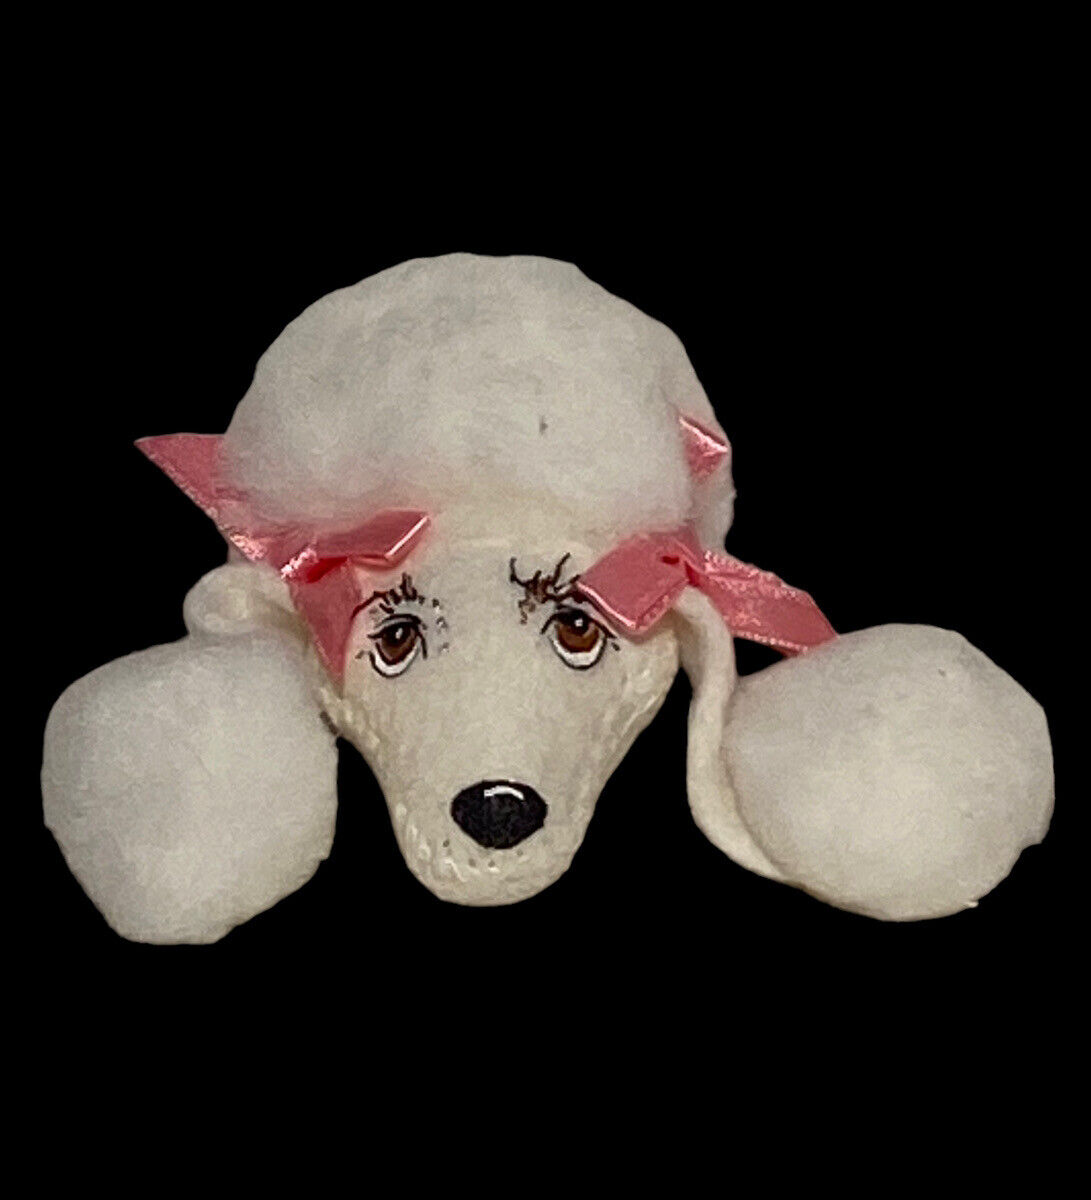 Vintage 1996-97 Annalee Doll Society Poodle Head Pin Lapel White Dog Pink Bows